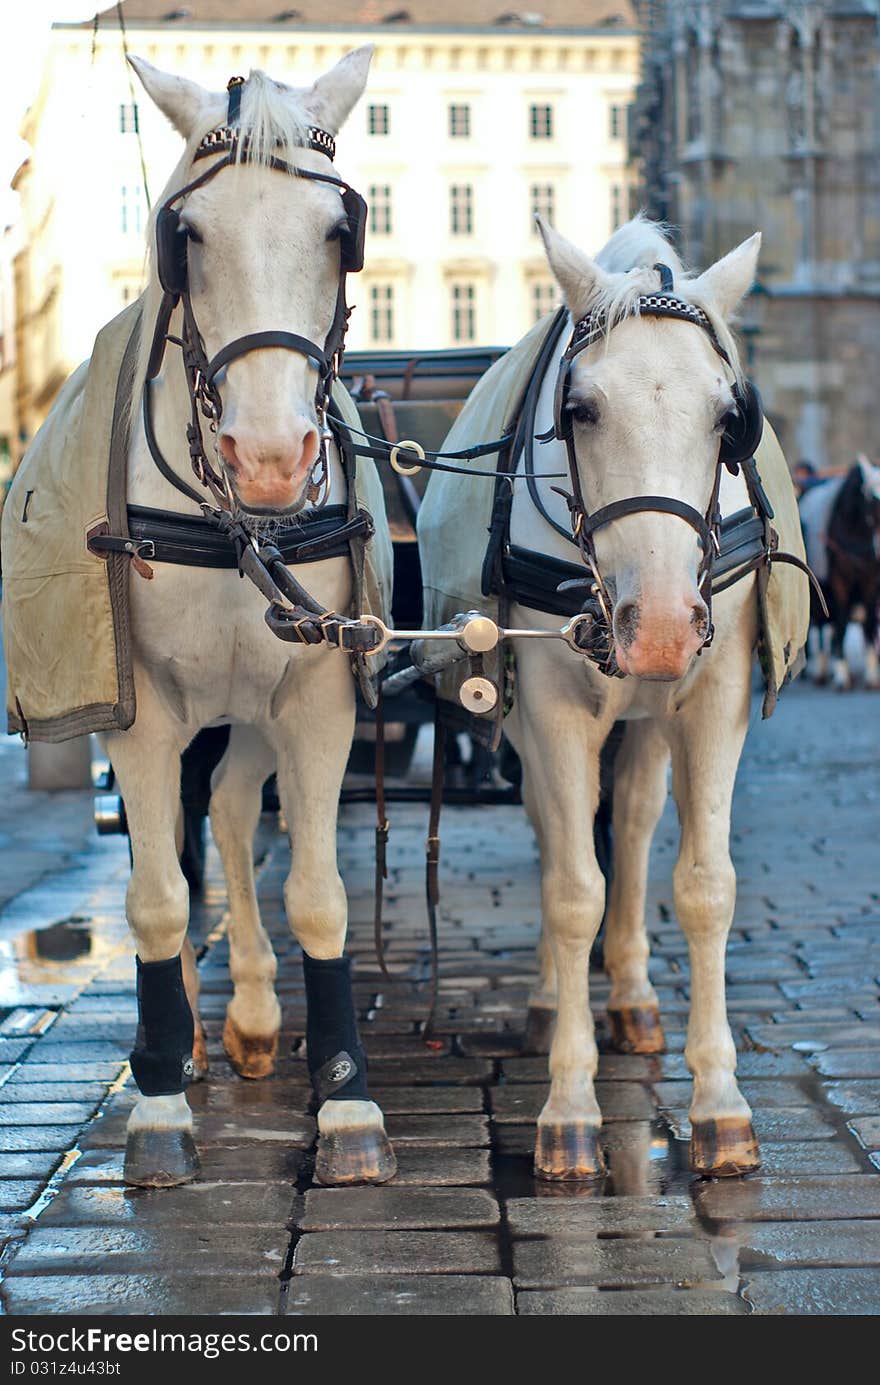 Vienna, Austria, a pair of horses harnessed to a carriage